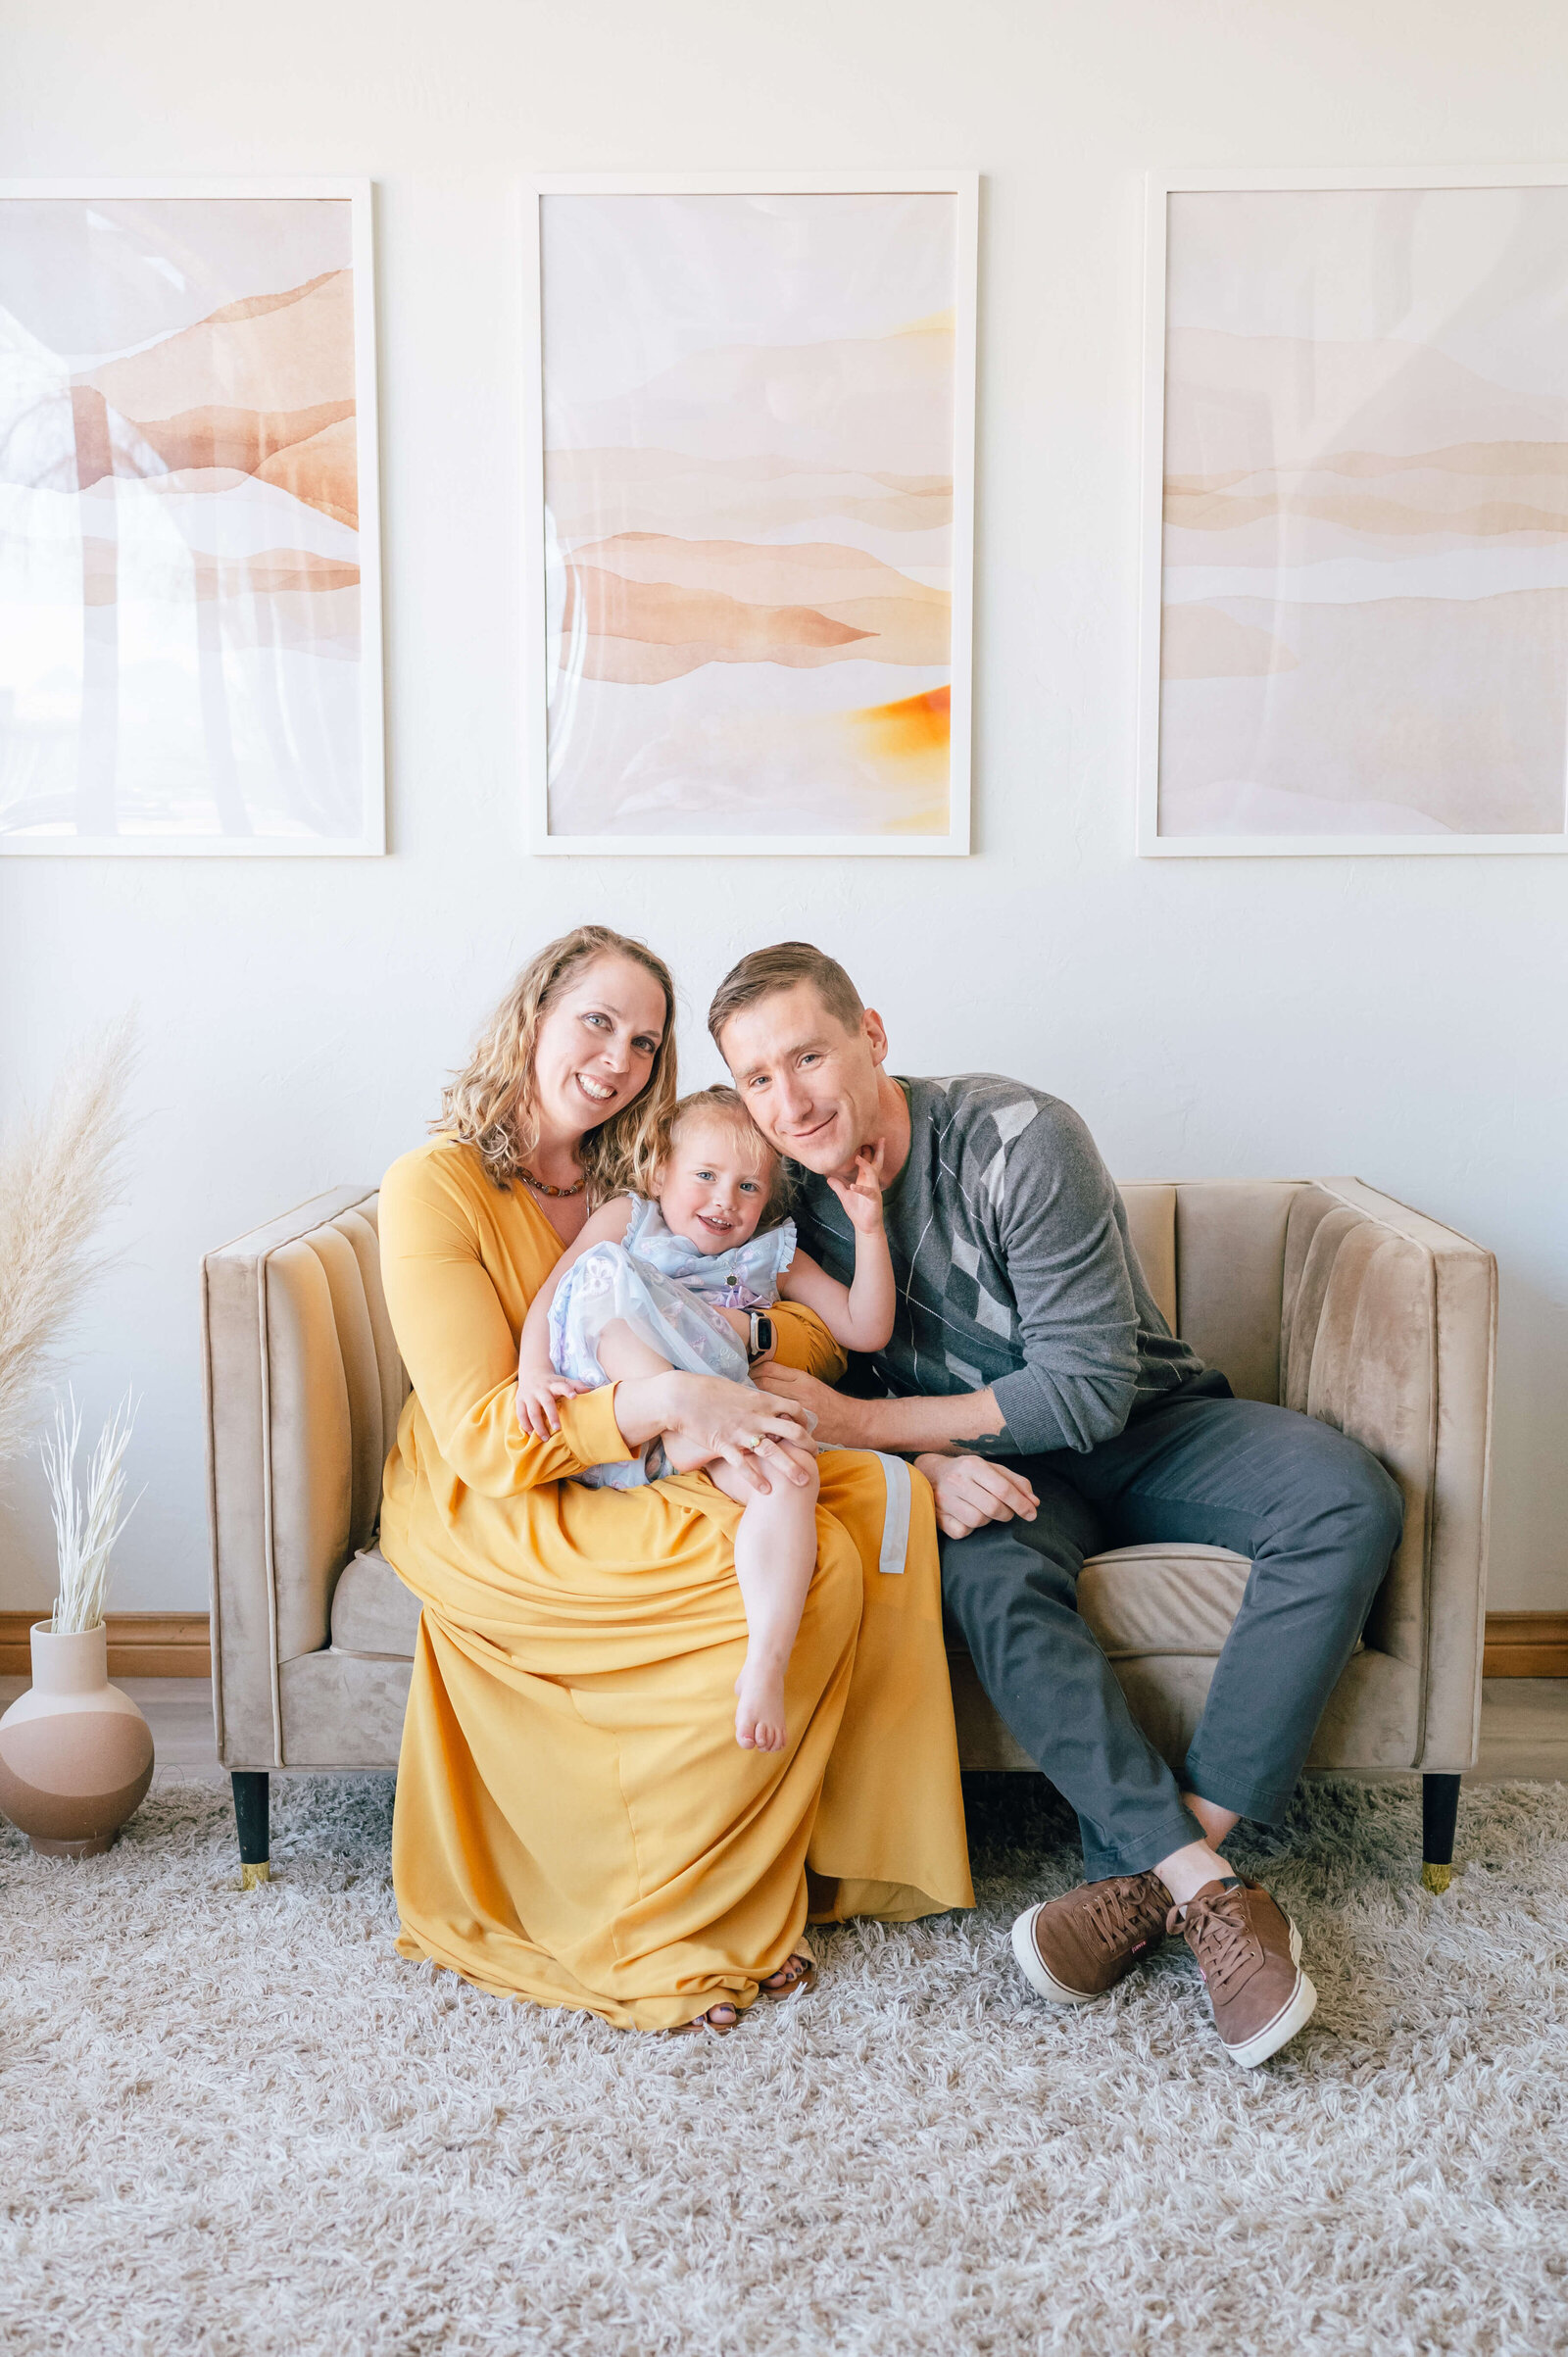 Within a white and well decorated room, a woman in a yellow dress holds her playful daughter while her husband hugs his daughter and looks at the camera